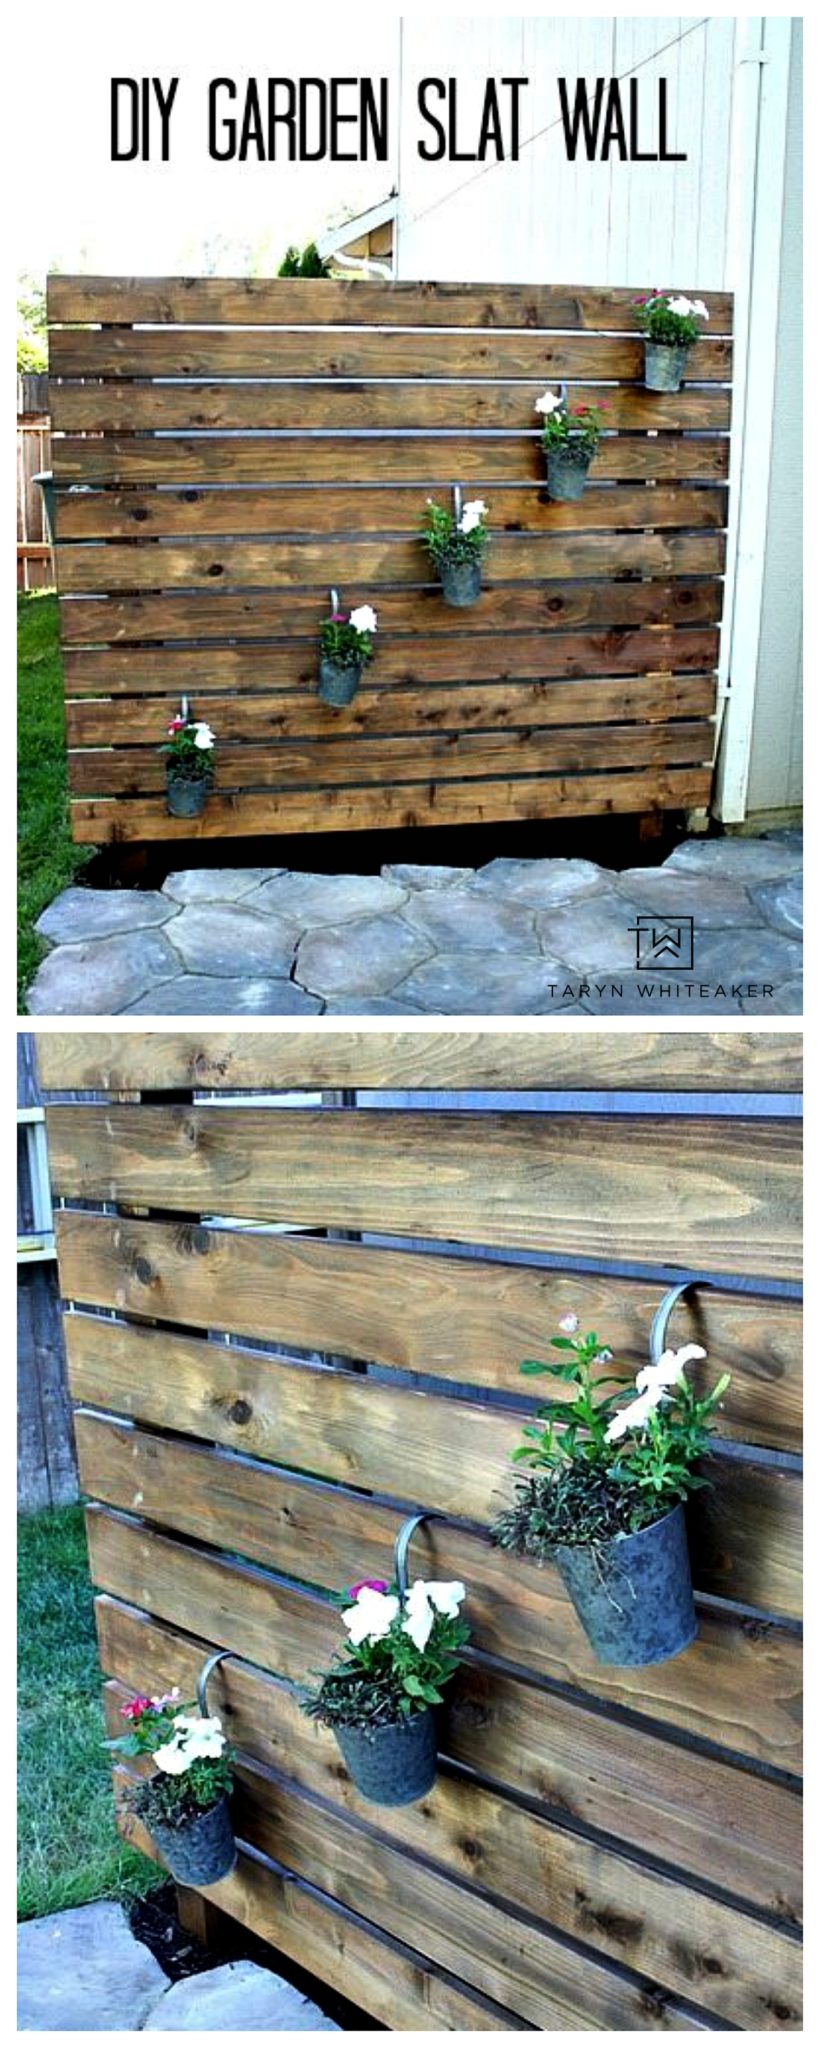 Learn how to build your own garden slat wall, a great wood privacy wall that can hide an ugly shed or make your patio more private from neighbors. 